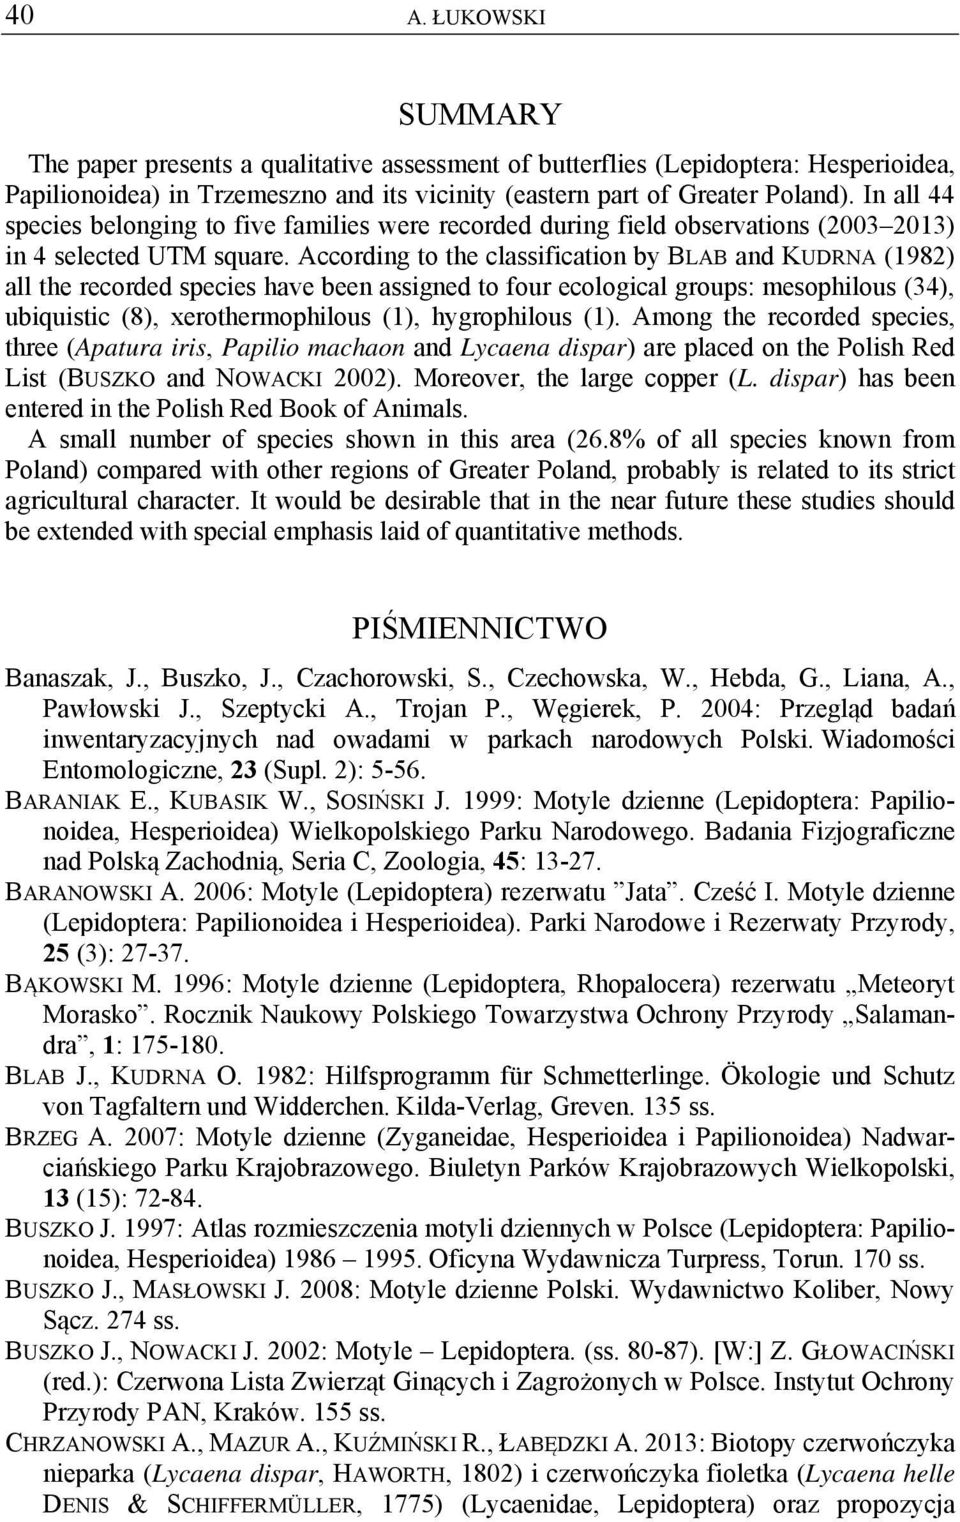 According to the classification by BLAB and KUDRNA (1982) all the recorded species have been assigned to four ecological groups: mesophilous (34), ubiquistic (8), xerothermophilous (1), hygrophilous